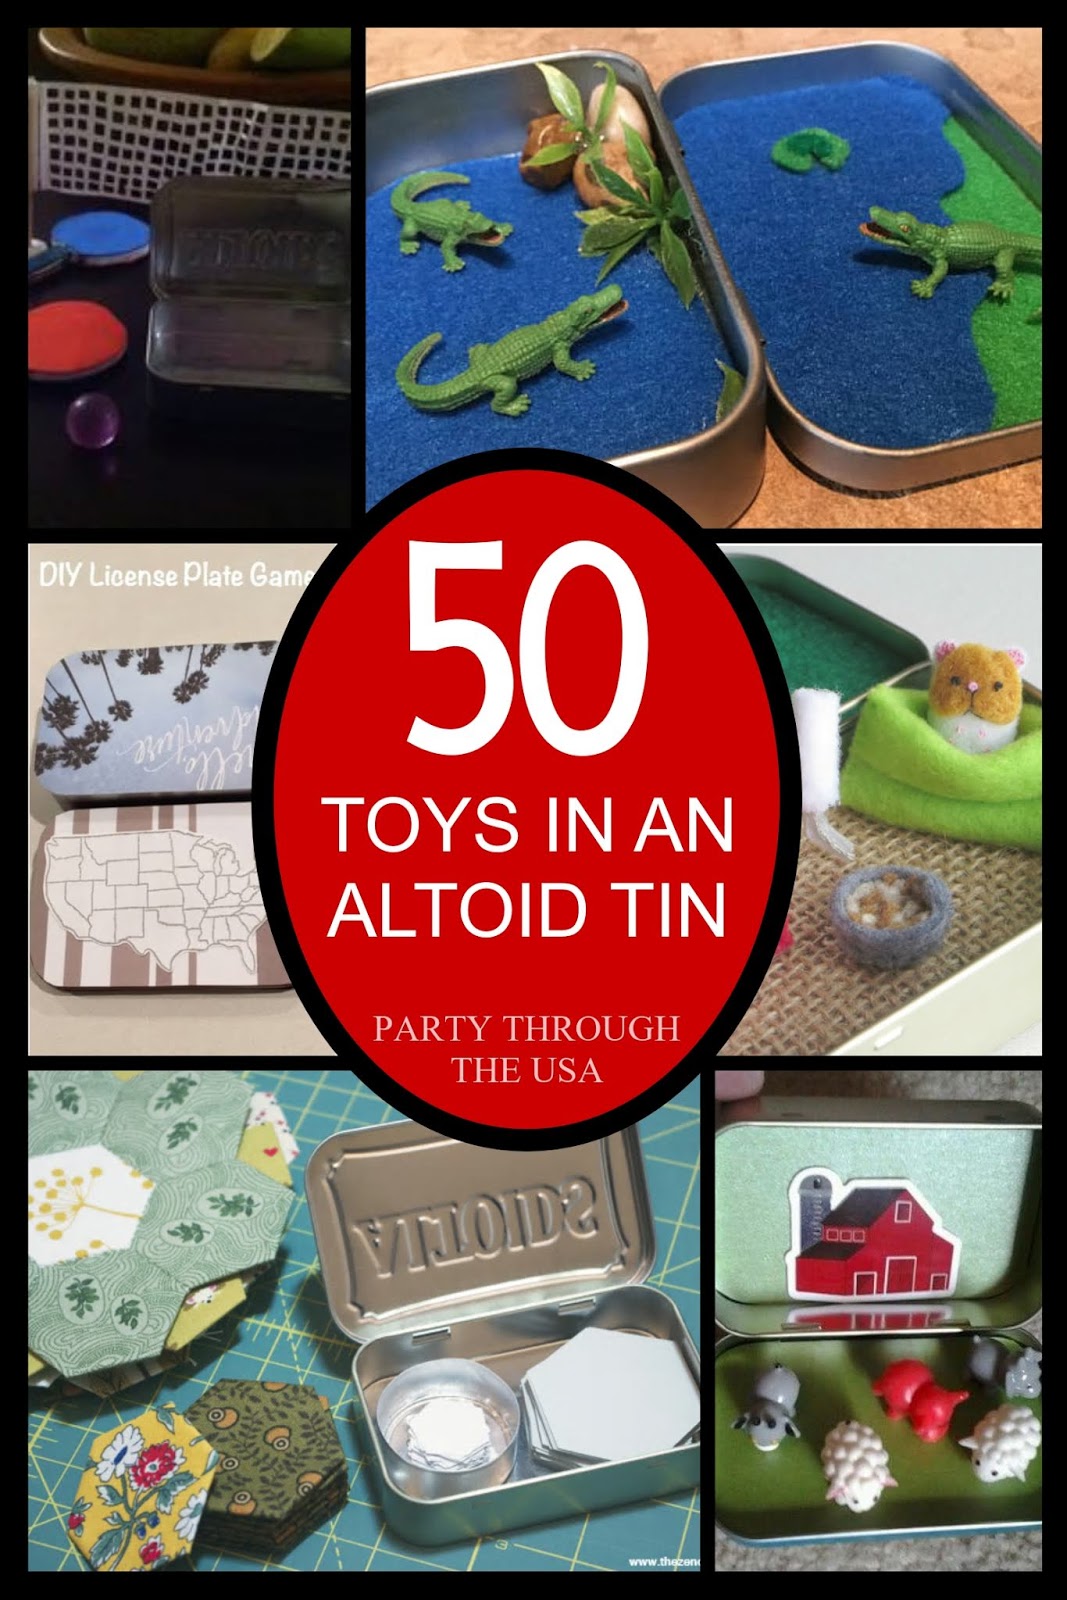 DIY Altoid Tin Travel Play Sets to Make in 5 Minutes or Less